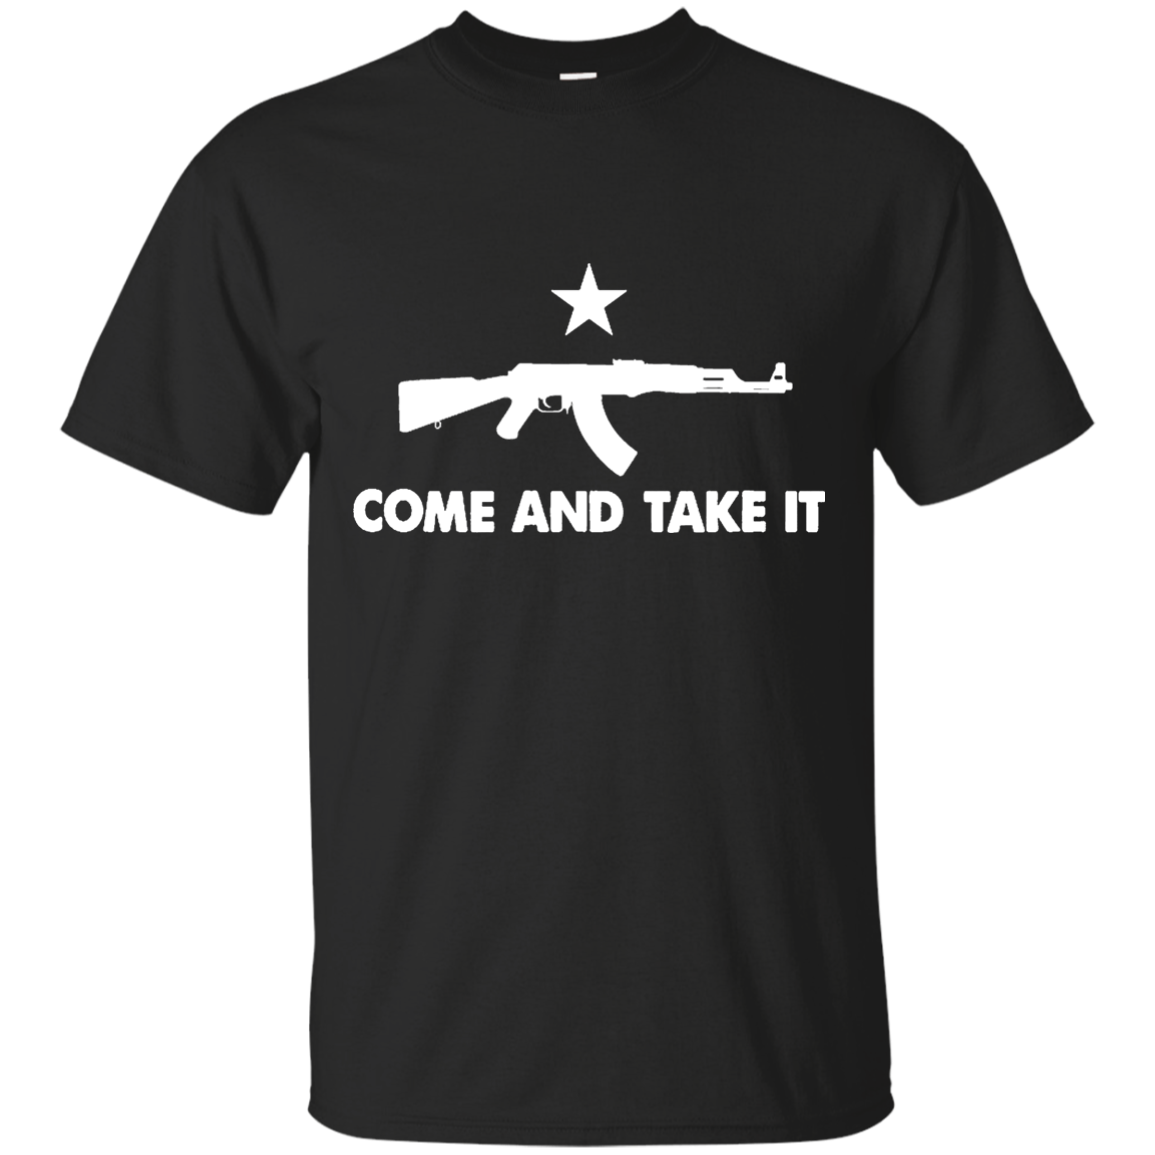 Come and Take It Shirt – PRW